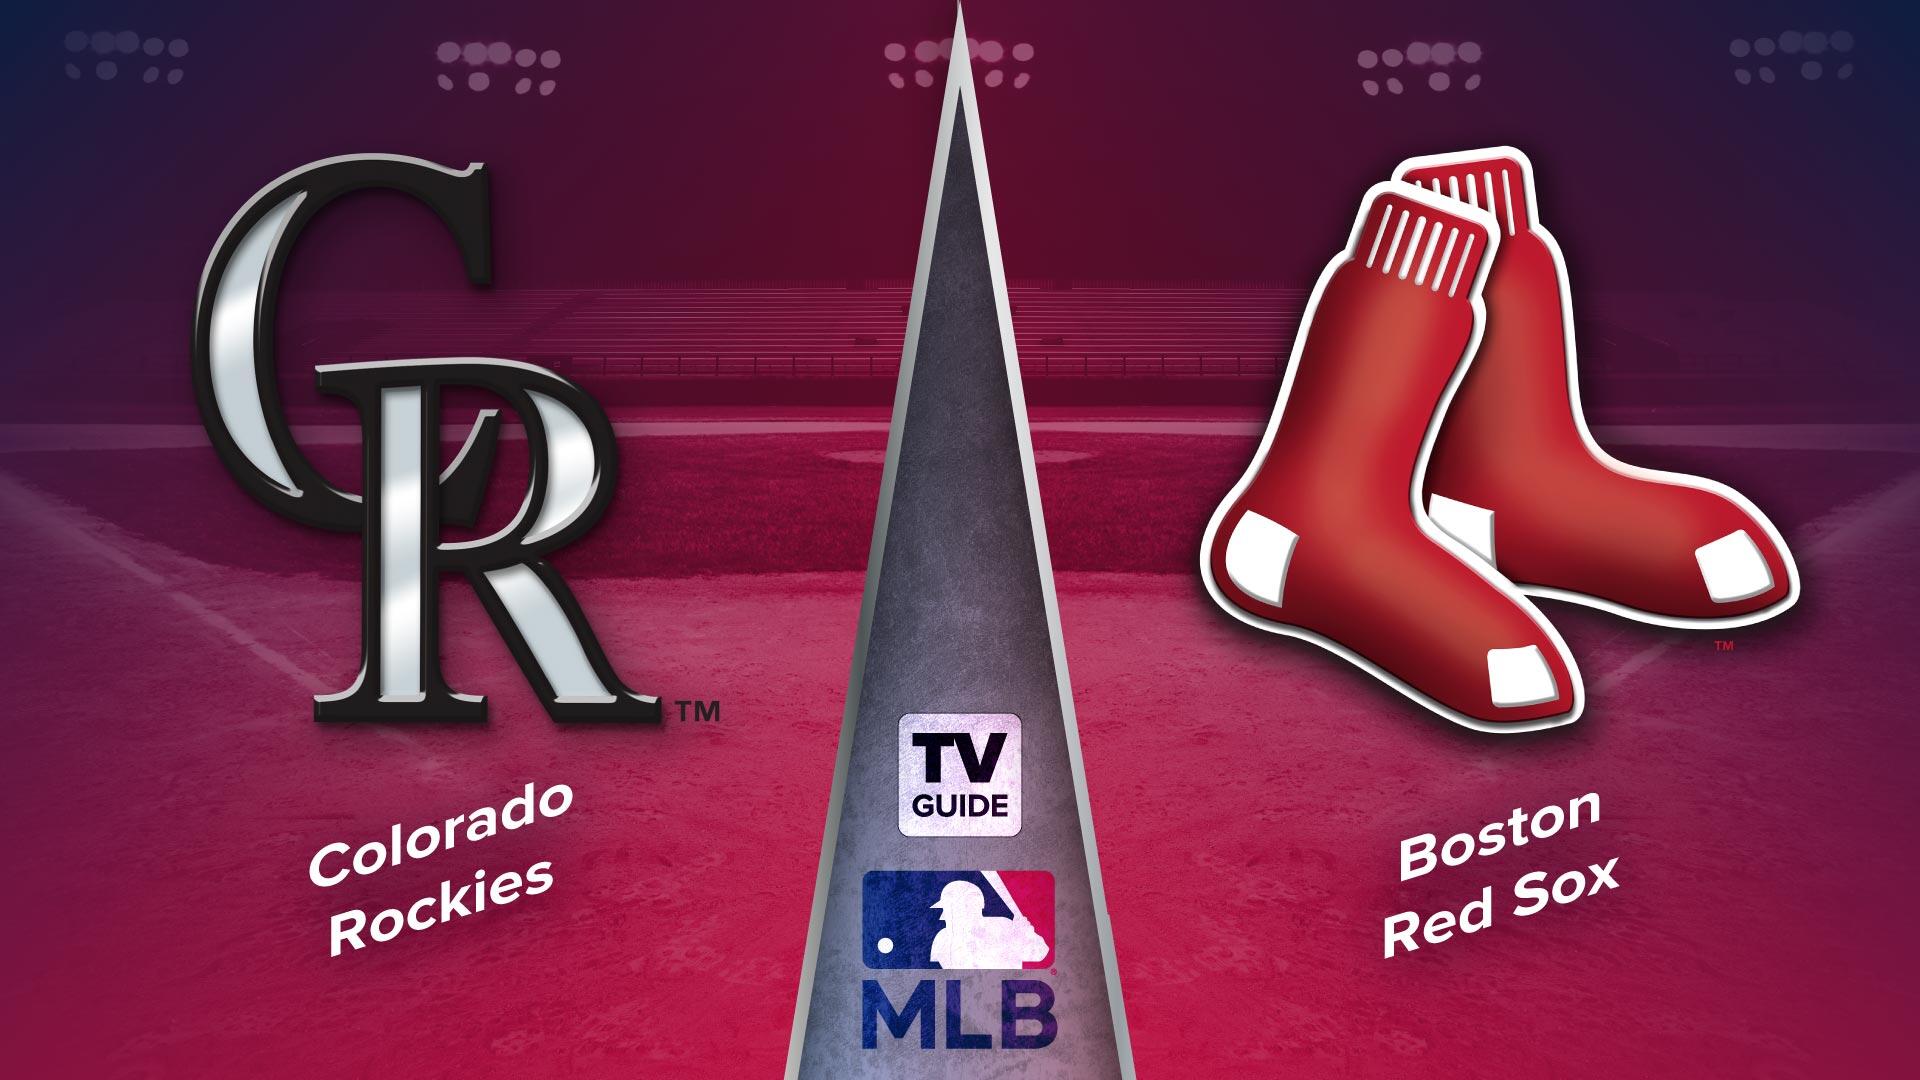 How to Watch Colorado Rockies vs. Boston Red Sox Live on Jun 12 TV Guide